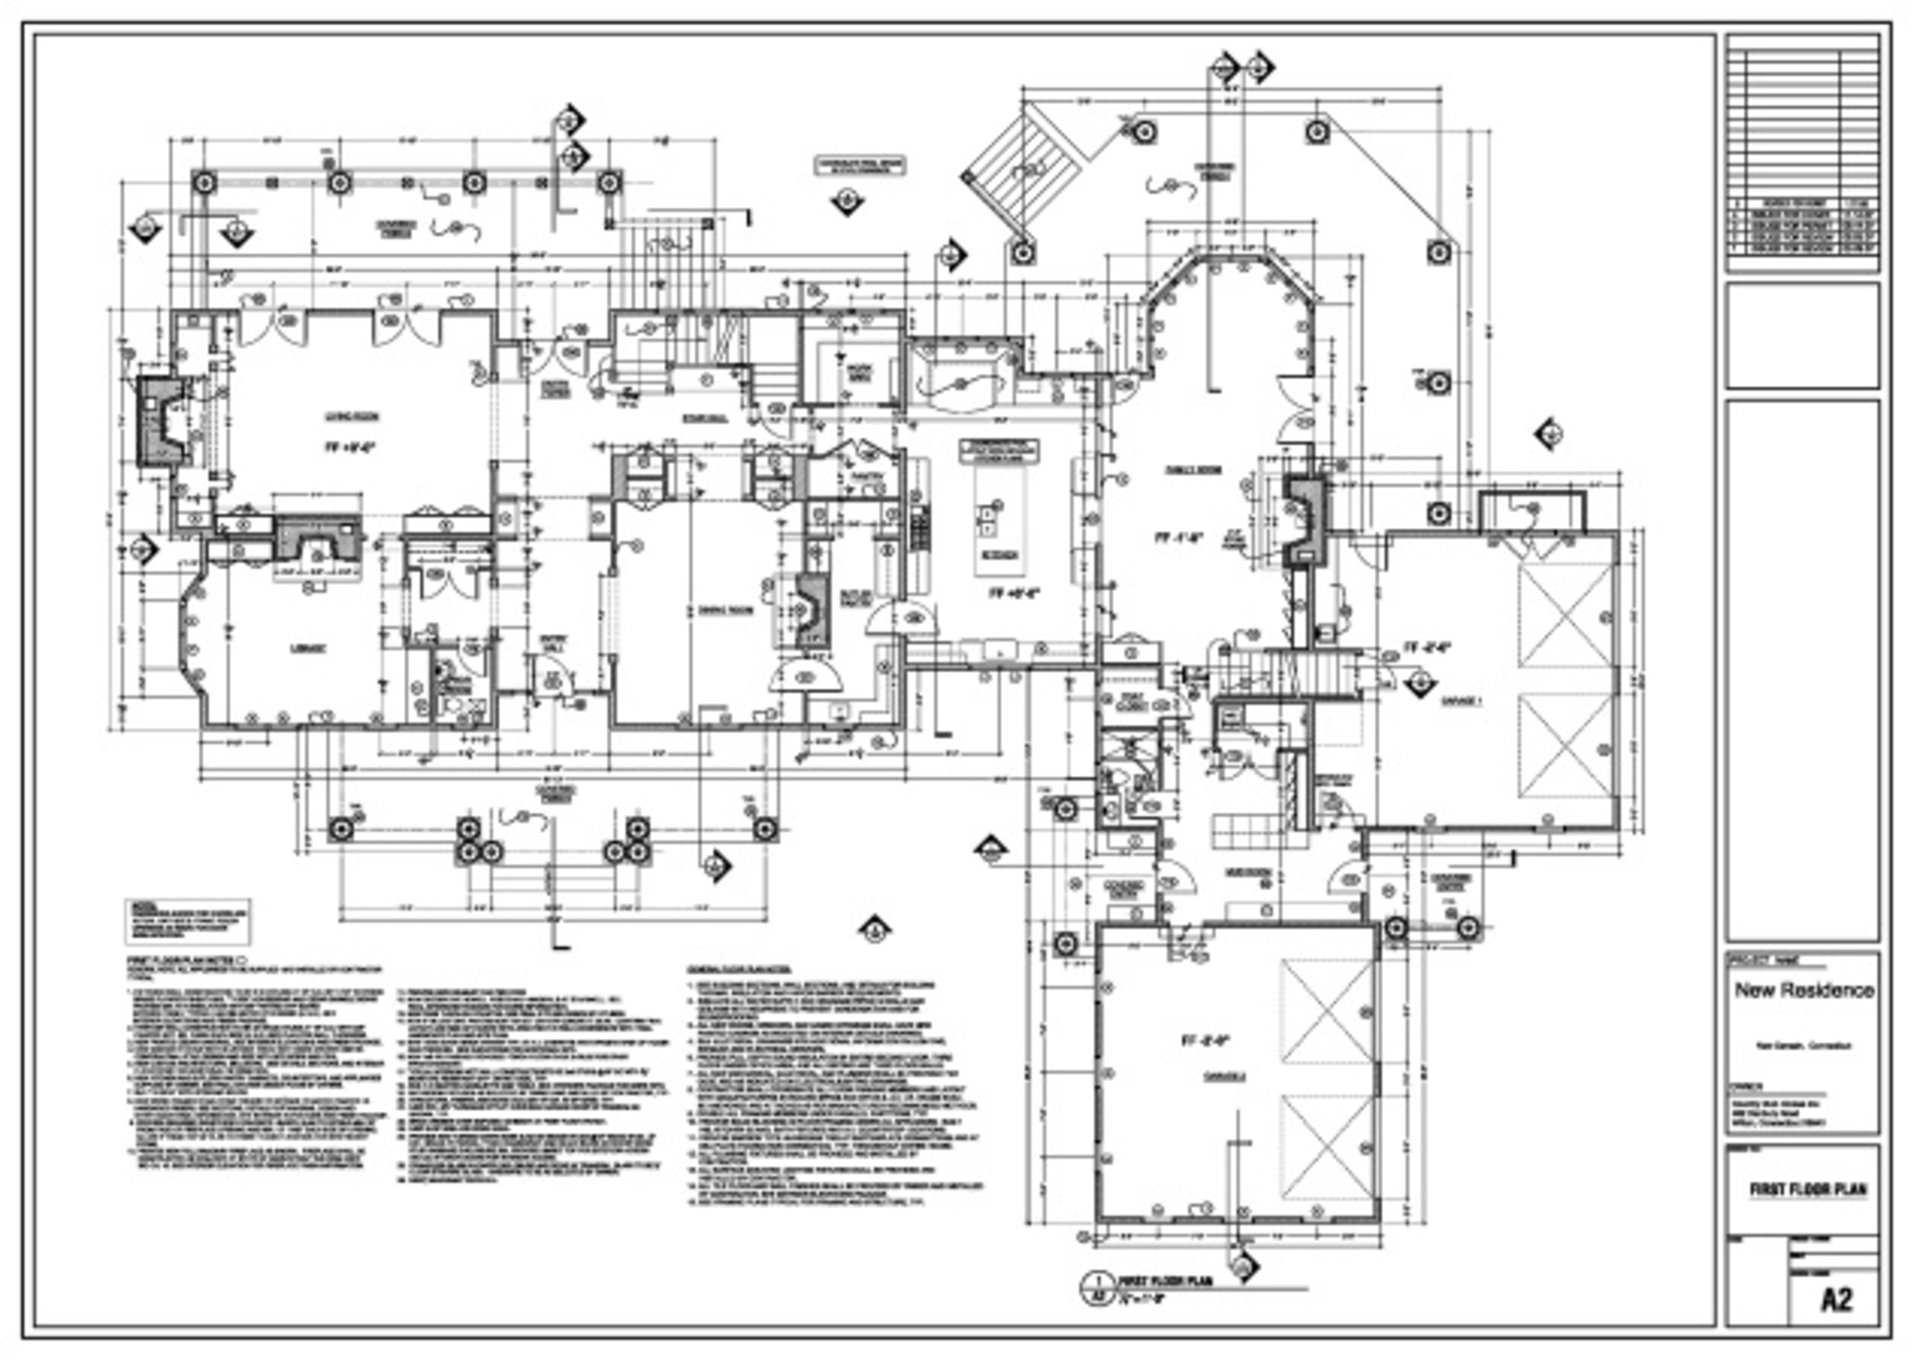 Design Build Process Overview | Country Club Homes, Inc.